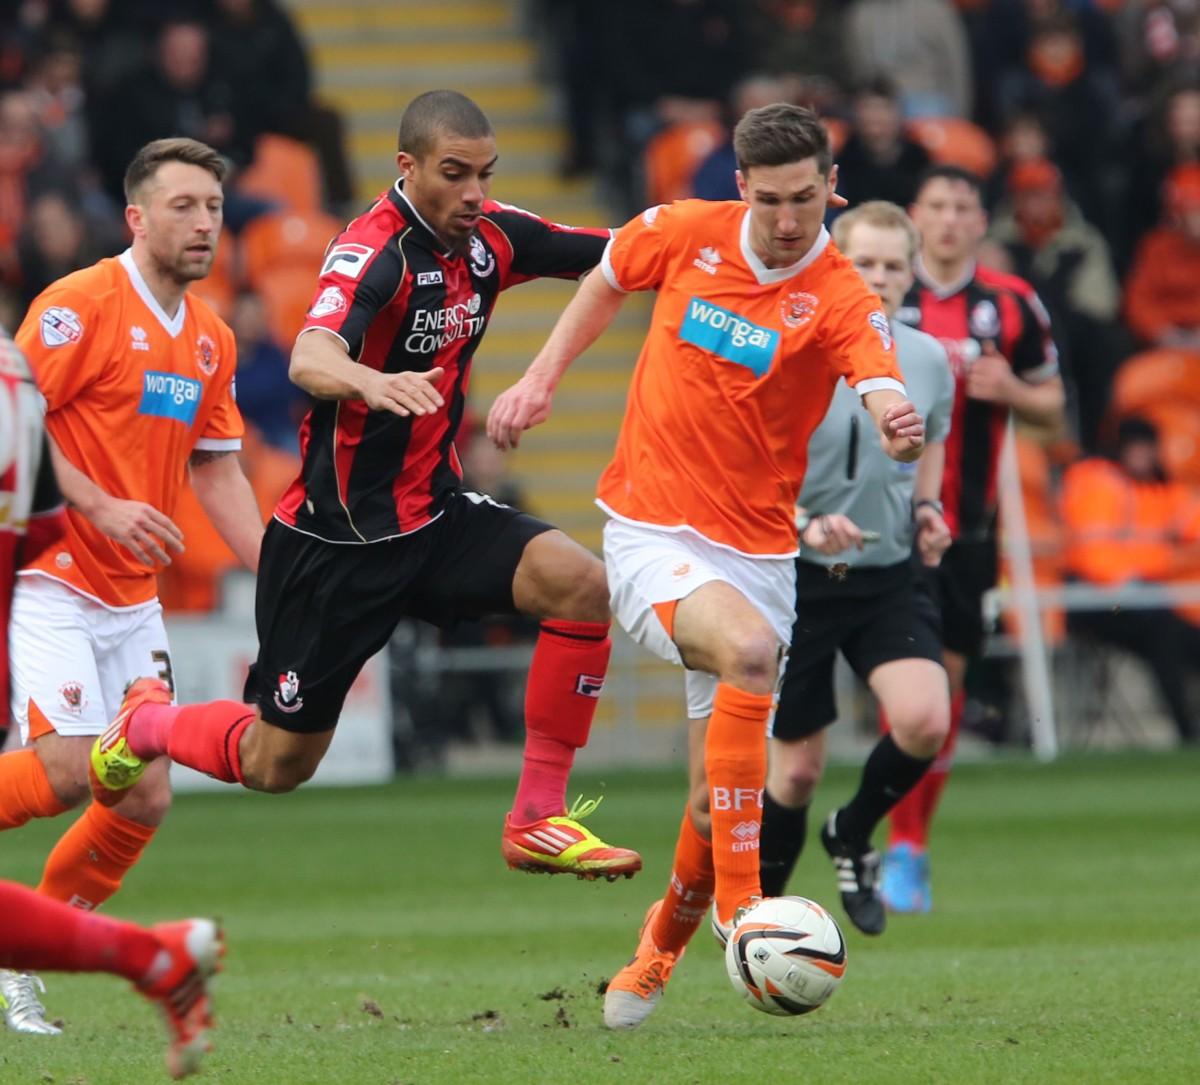 All our pictures from Blackpool v AFC Bournemouth at Bloomfield Road on Saturday, March 8, 2014. 